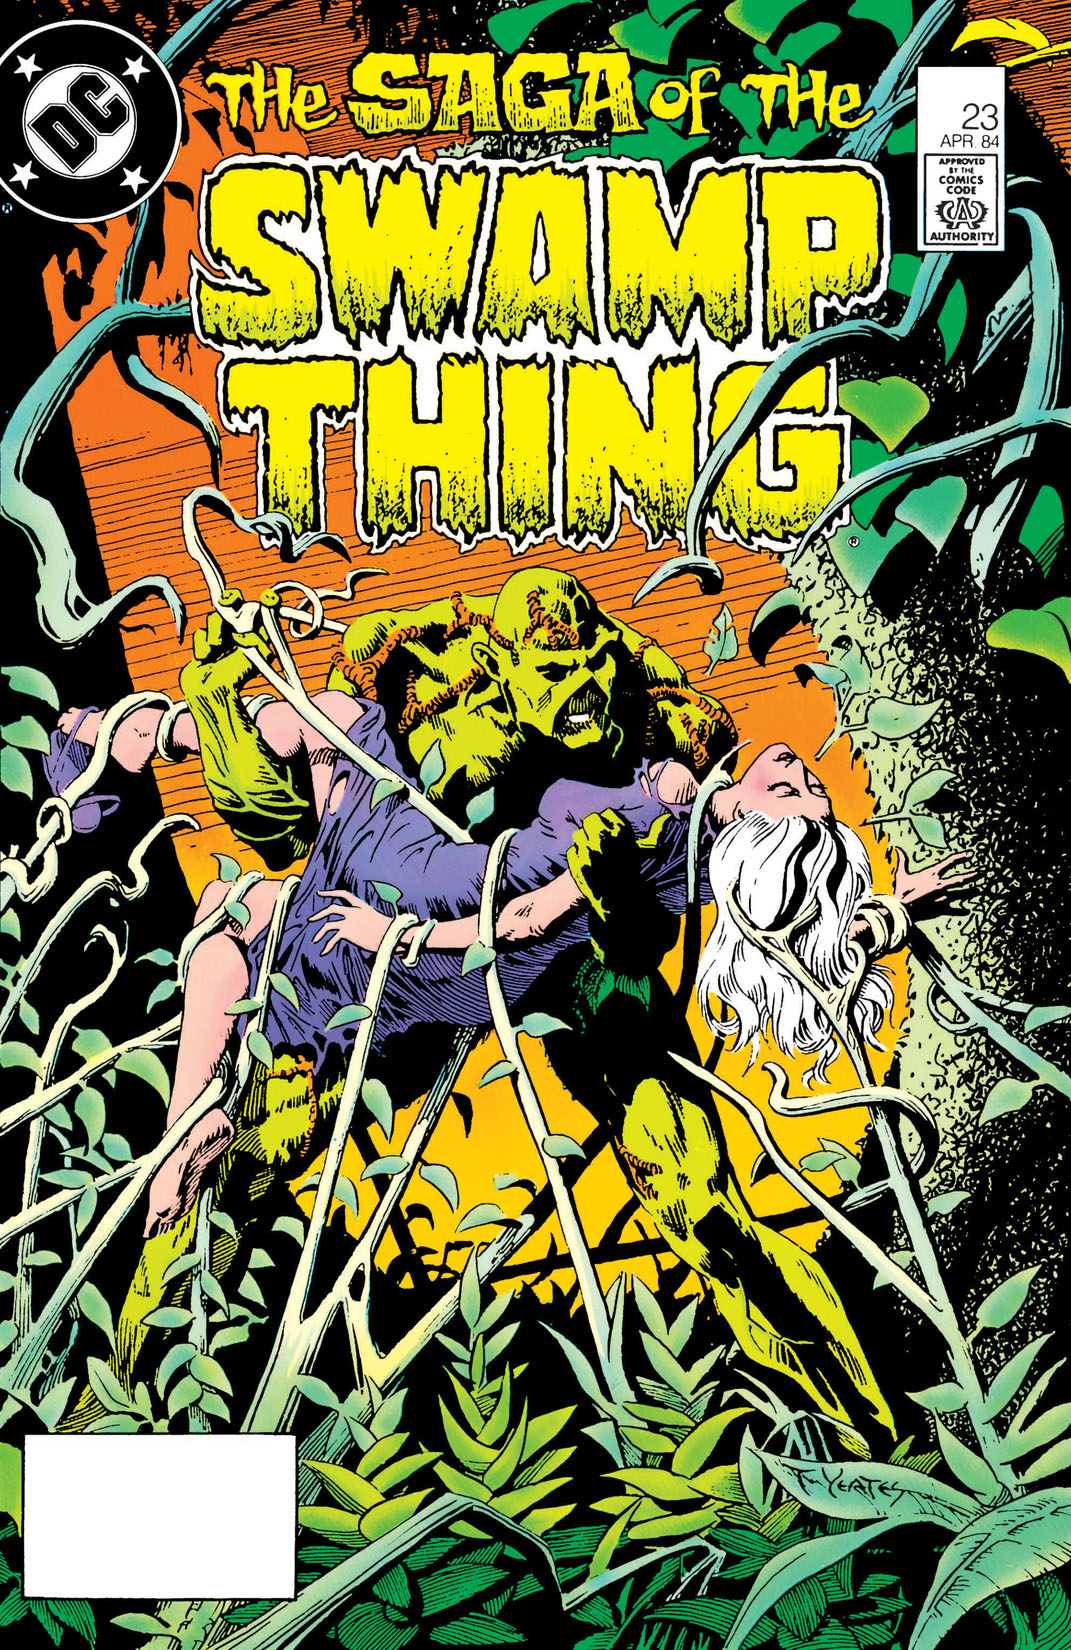 The Saga of the Swamp Thing (1982-) #23 preview images